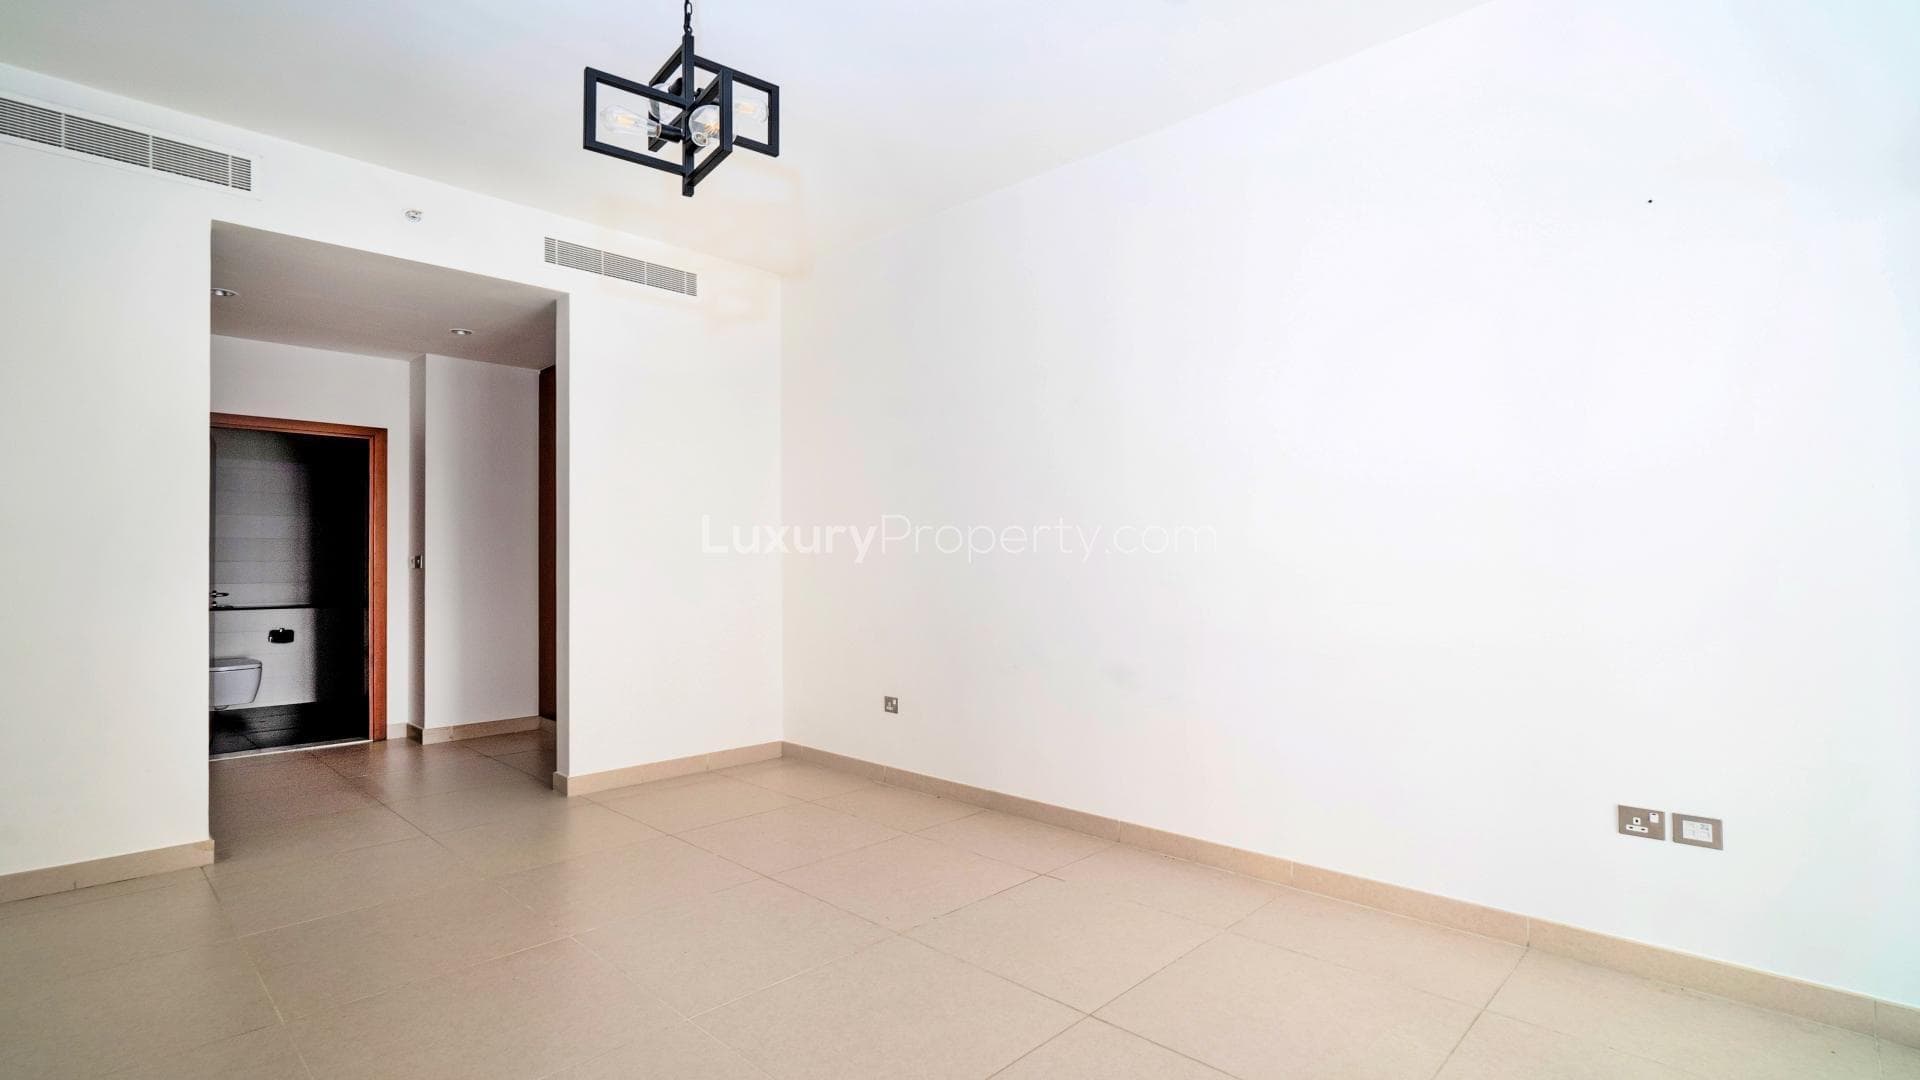 2 Bedroom Apartment For Rent Central Park Tower Lp36083 2219f986ca322800.jpg